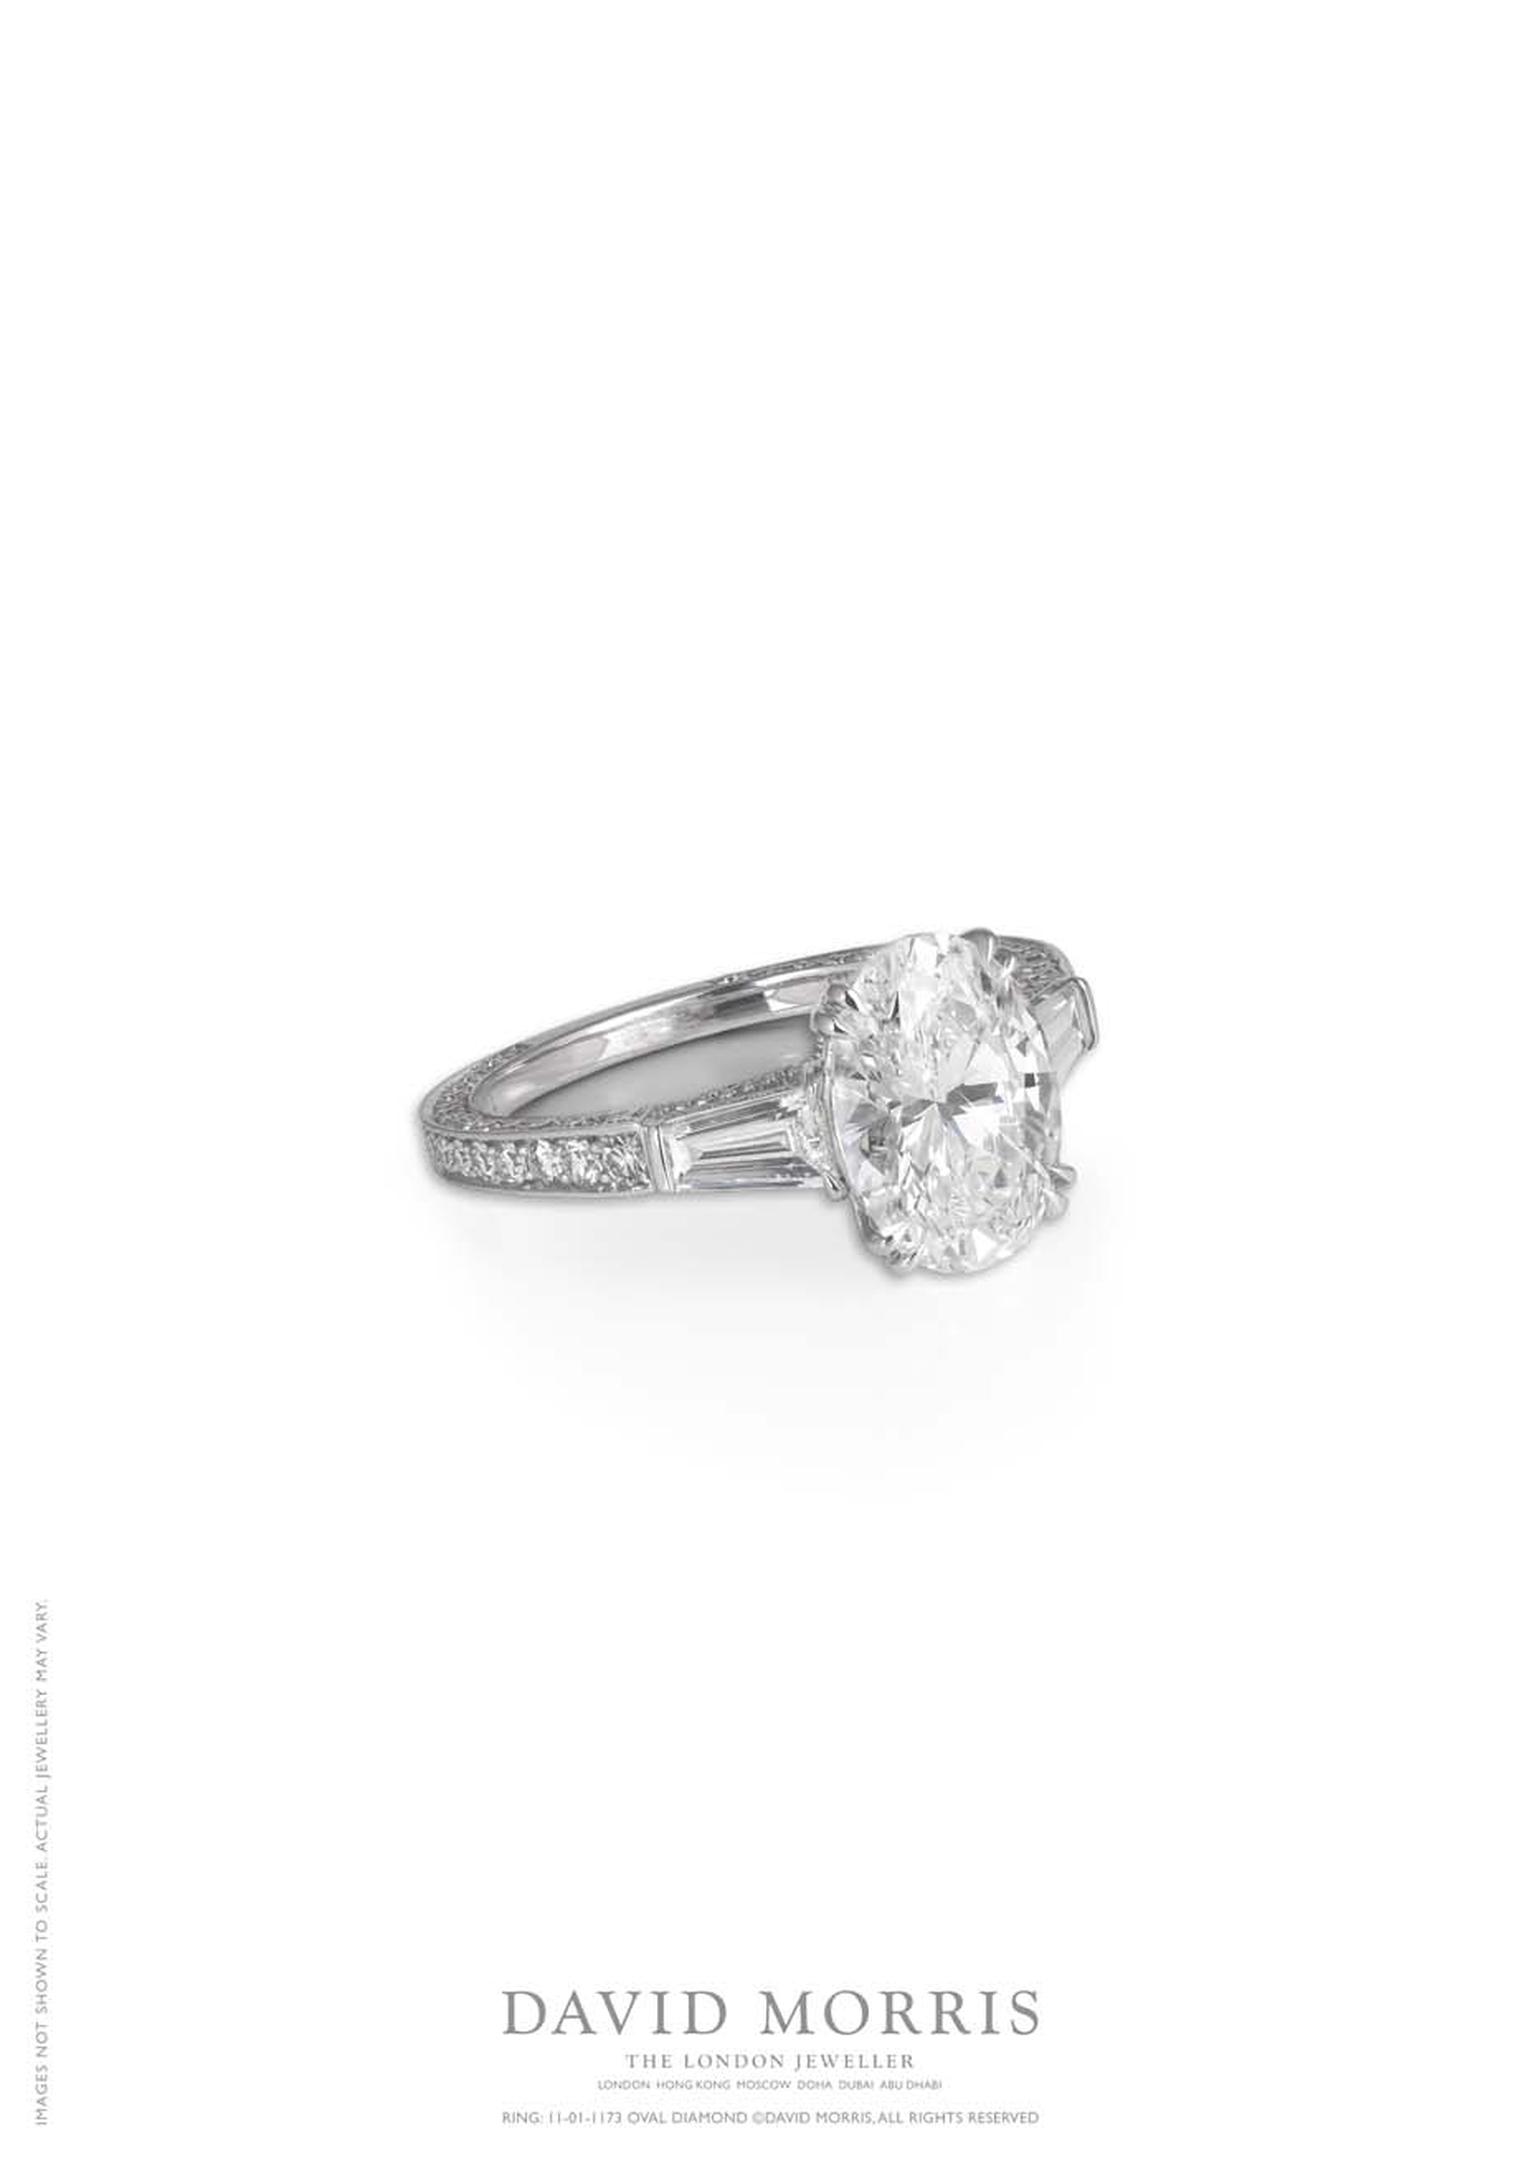 301170 events service, paired with David Morris’ oval and baguette-cut diamond ring (£45,000 at davidmorris.com).